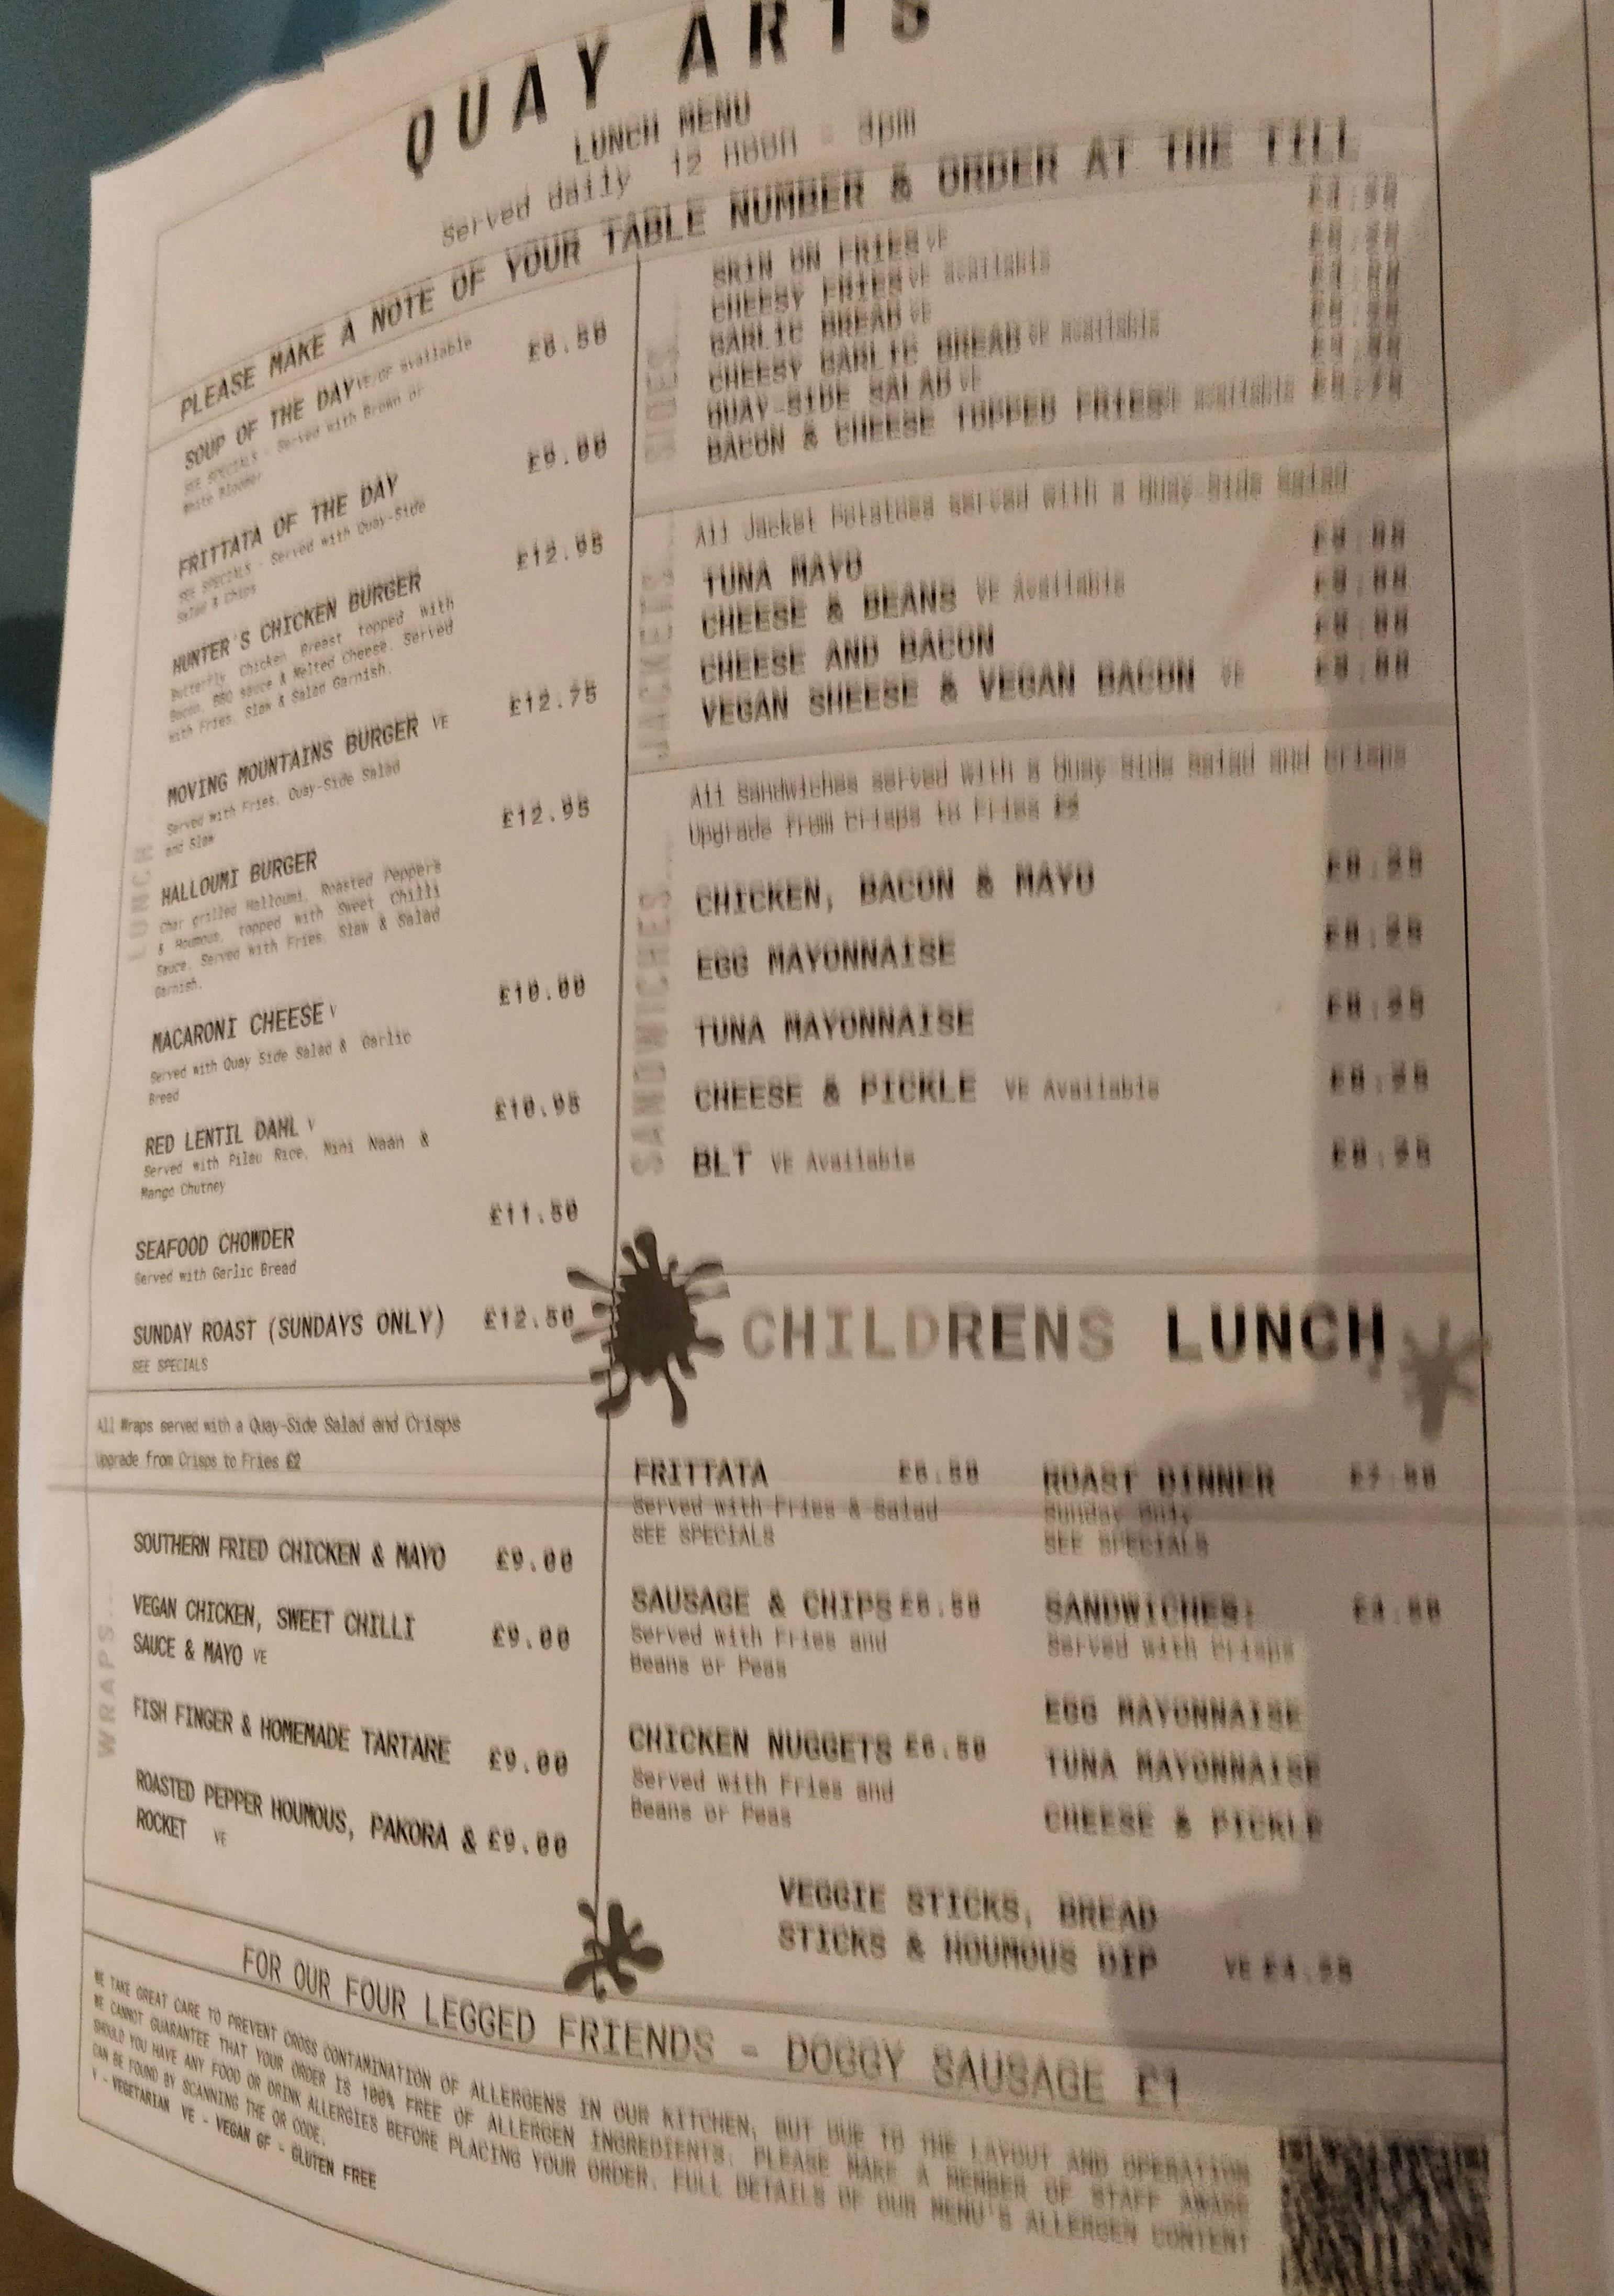 Second page of the menu